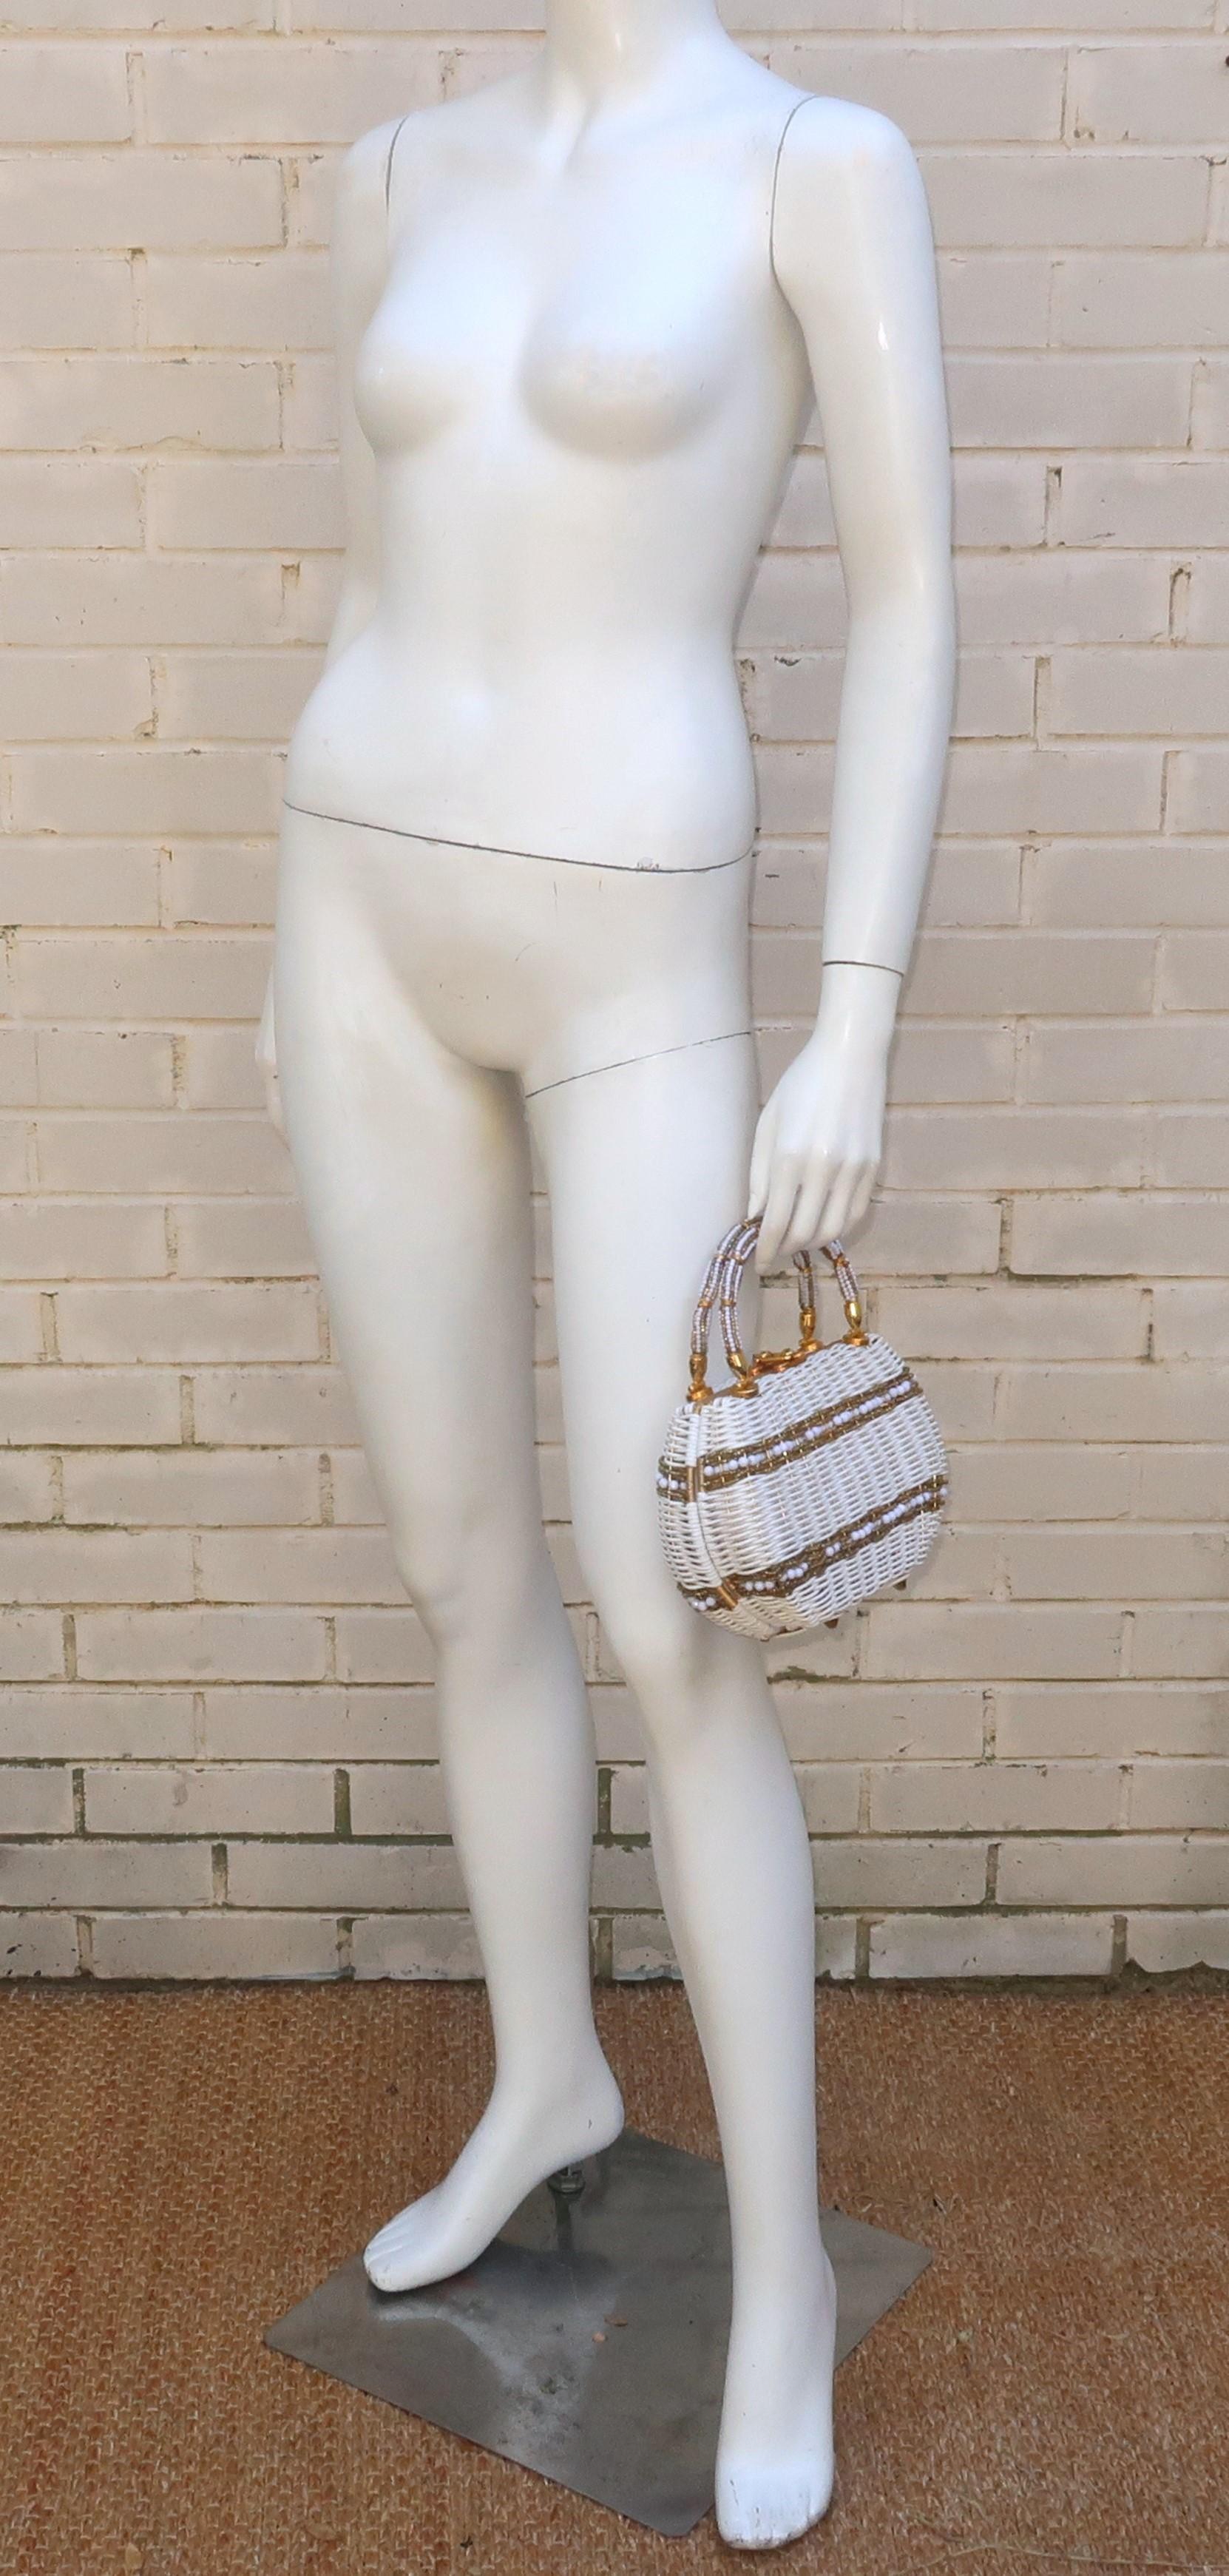 Marcus Brothers Beaded White & Gold Straw Handbag, 1950's For Sale 8